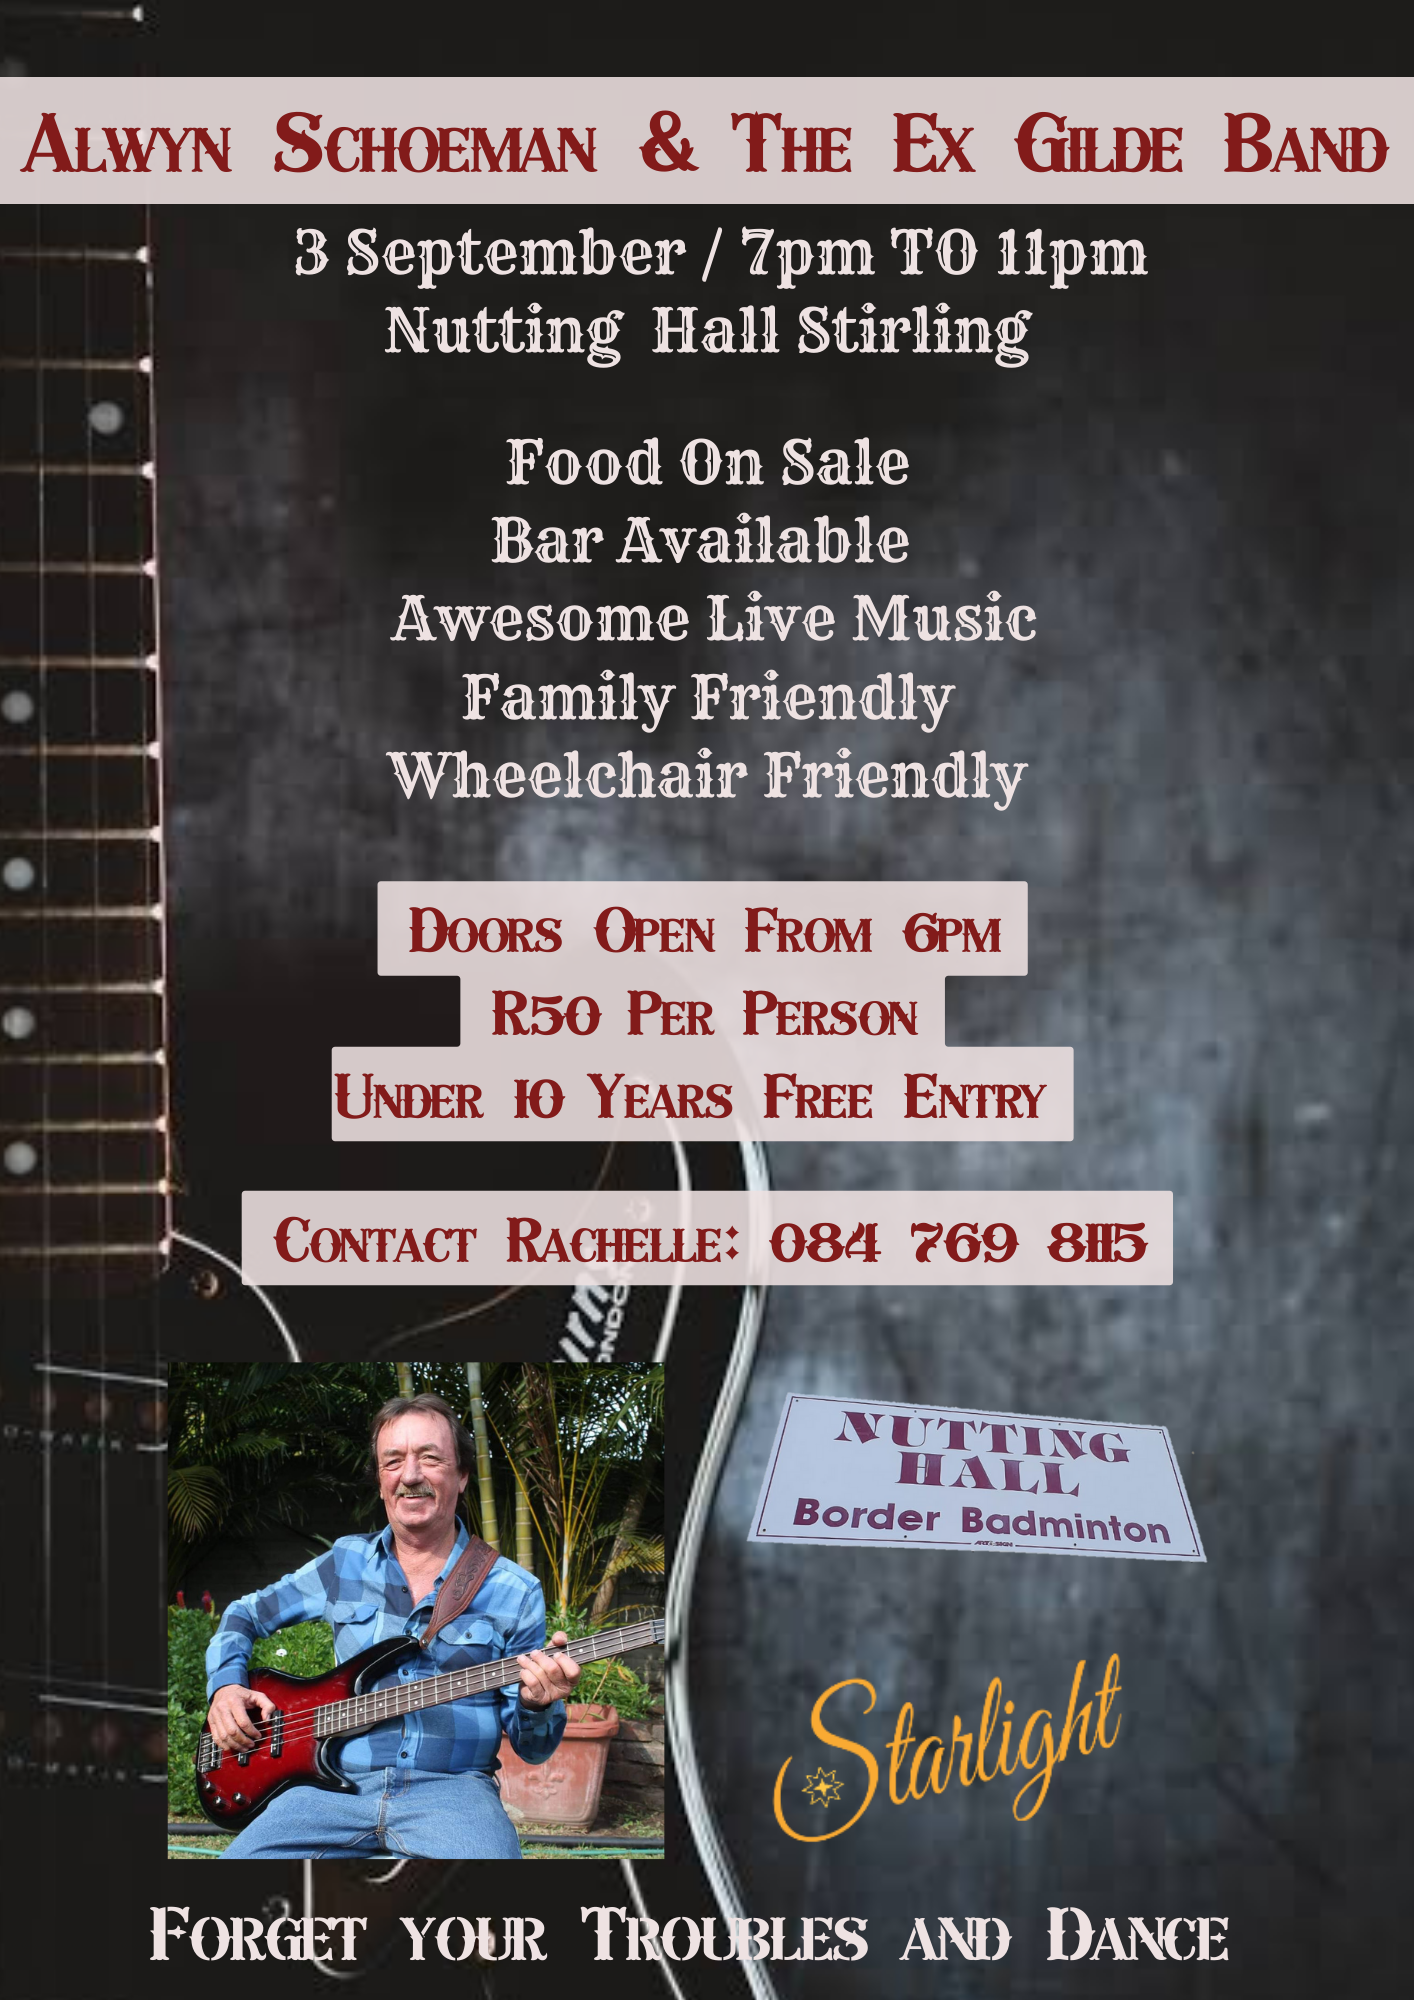 ALwYN ScHOEMAN & THE Ex Gib Banp

y 3 September / 7pm TO 1ipm
J Nutting Hall Stirling

9

0 JT LSE IF: Le
Ji EV NET EY
Awesome Live Music
Family Friendly
Wheelchair Friendly

 
      
   

Doors Open From 6PM
R50 Per PERSON

ge

N TING
ENC

| Border Badminton |

  
     
    

— YOUR Ti wp! LES AND DANCE